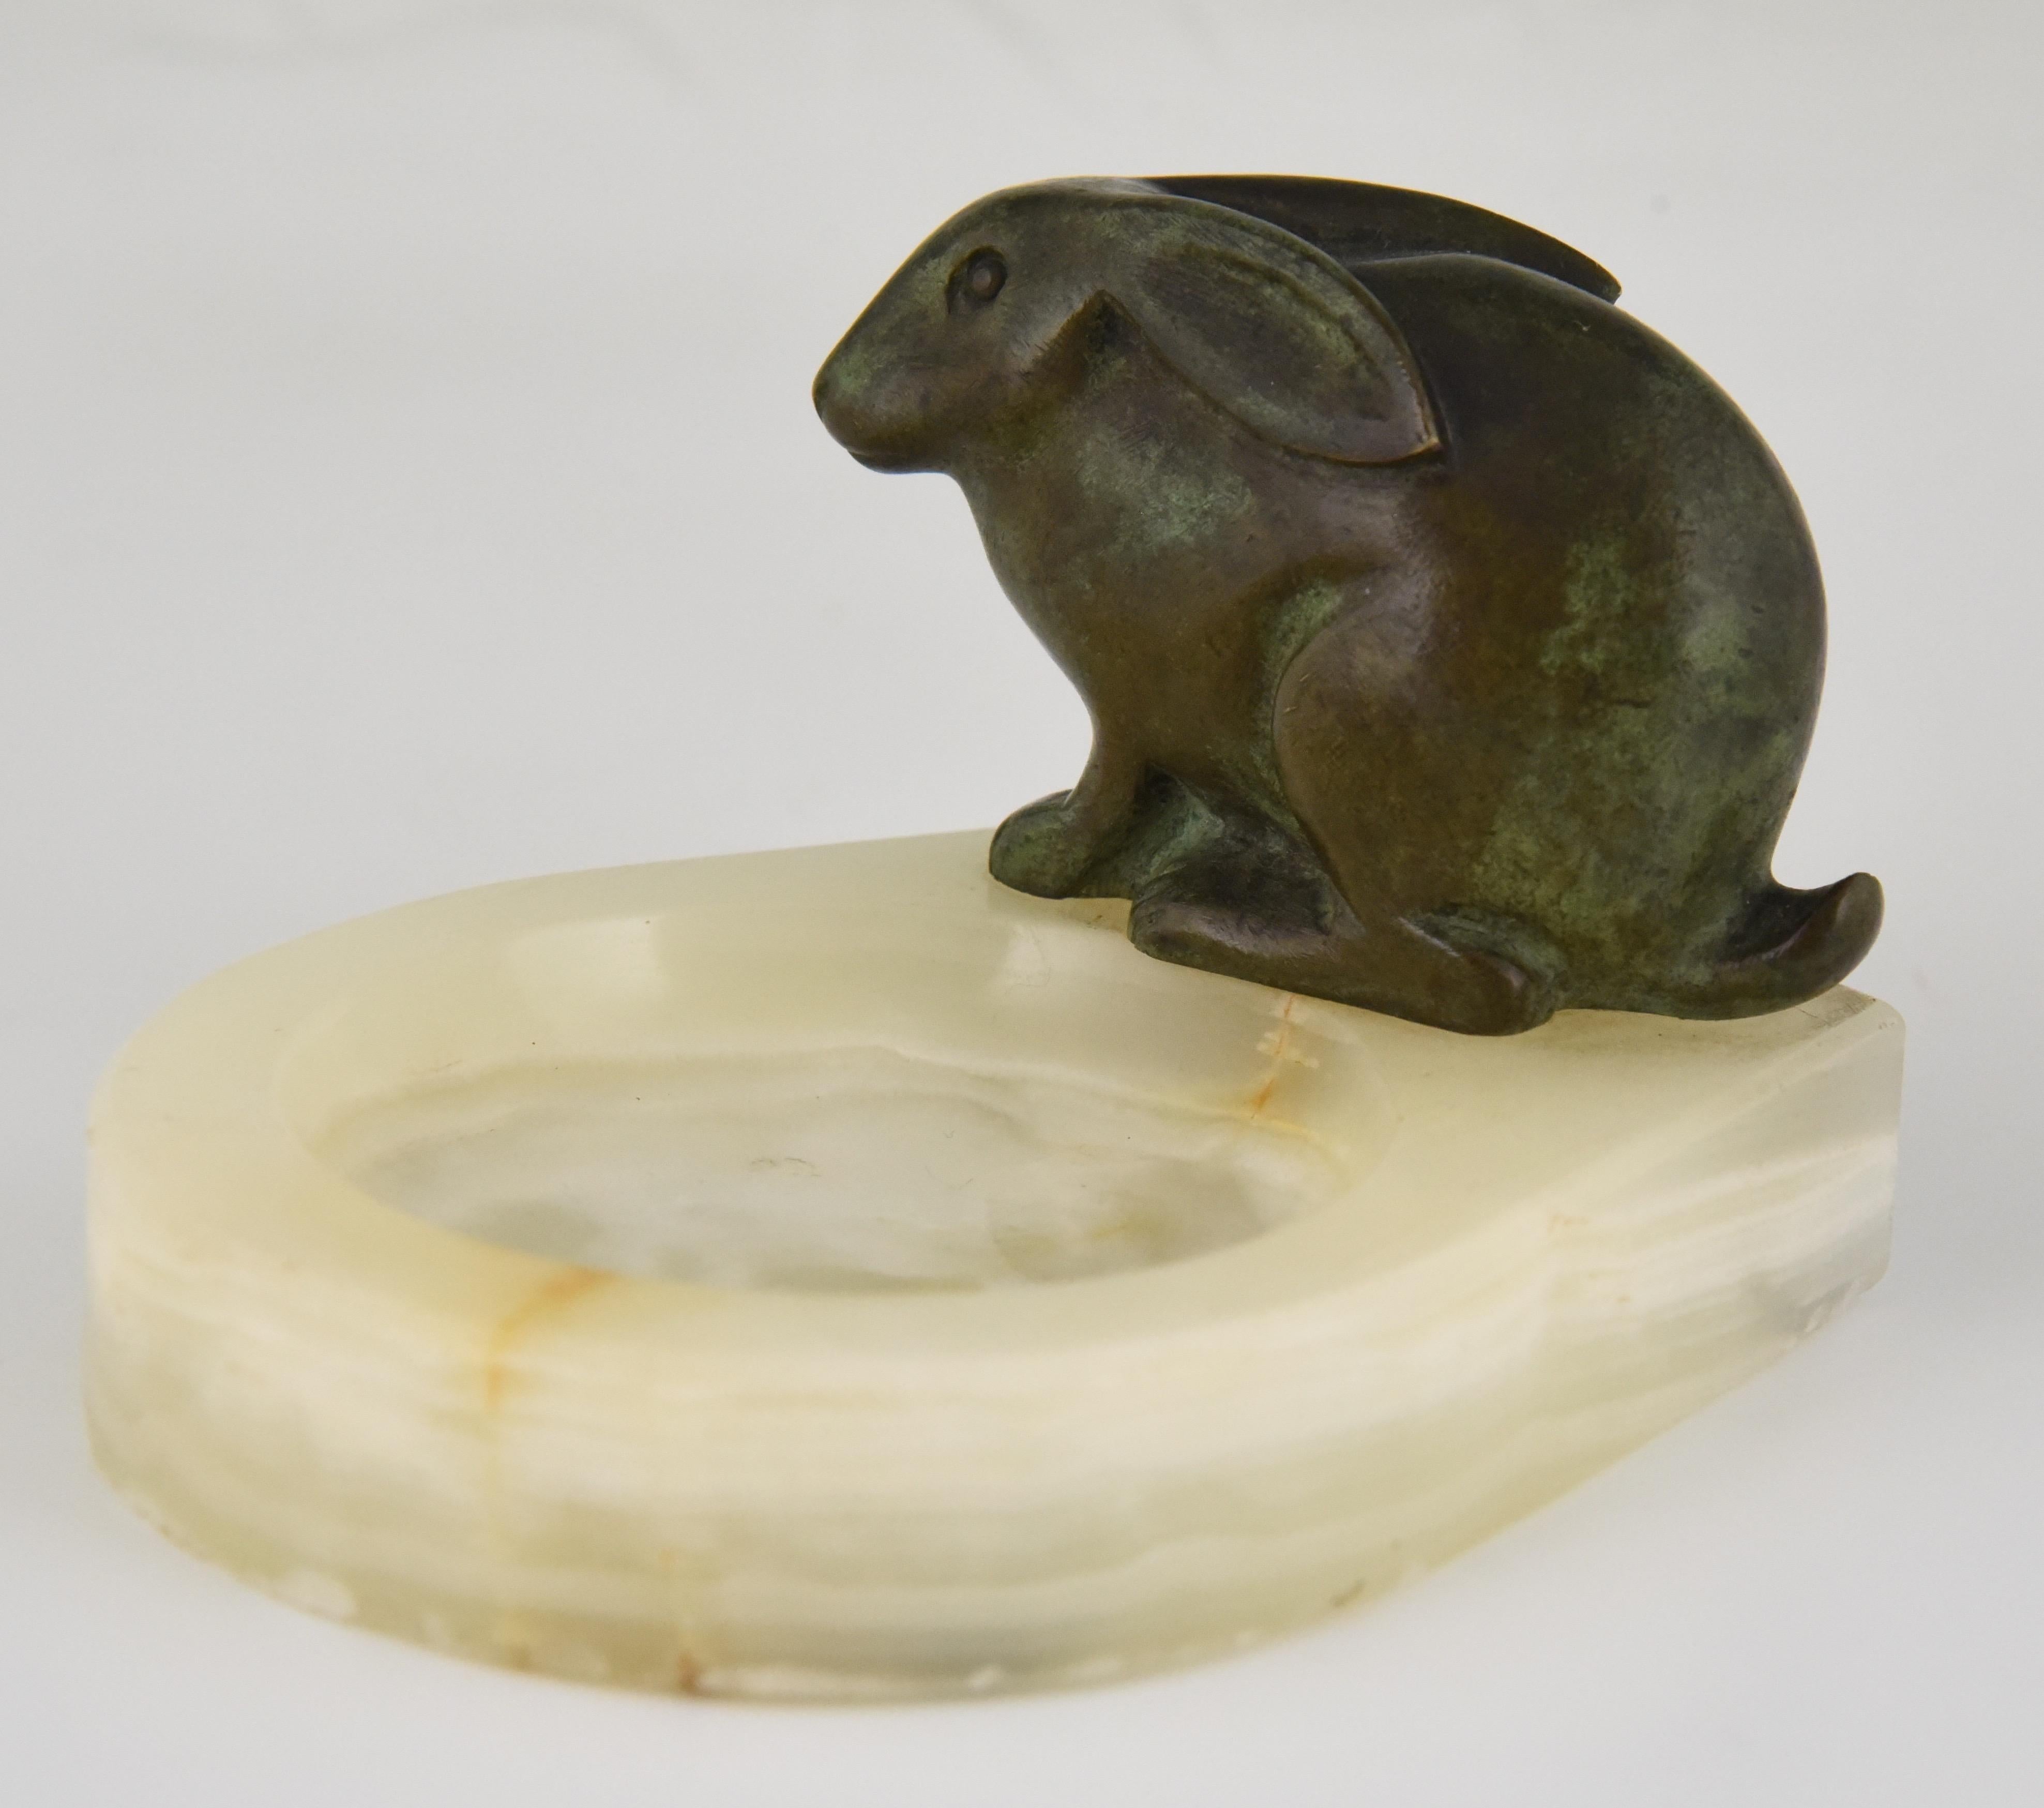 Cute Art Deco tray with bronze rabbit, signed by the French artist Claude, circa 1930.